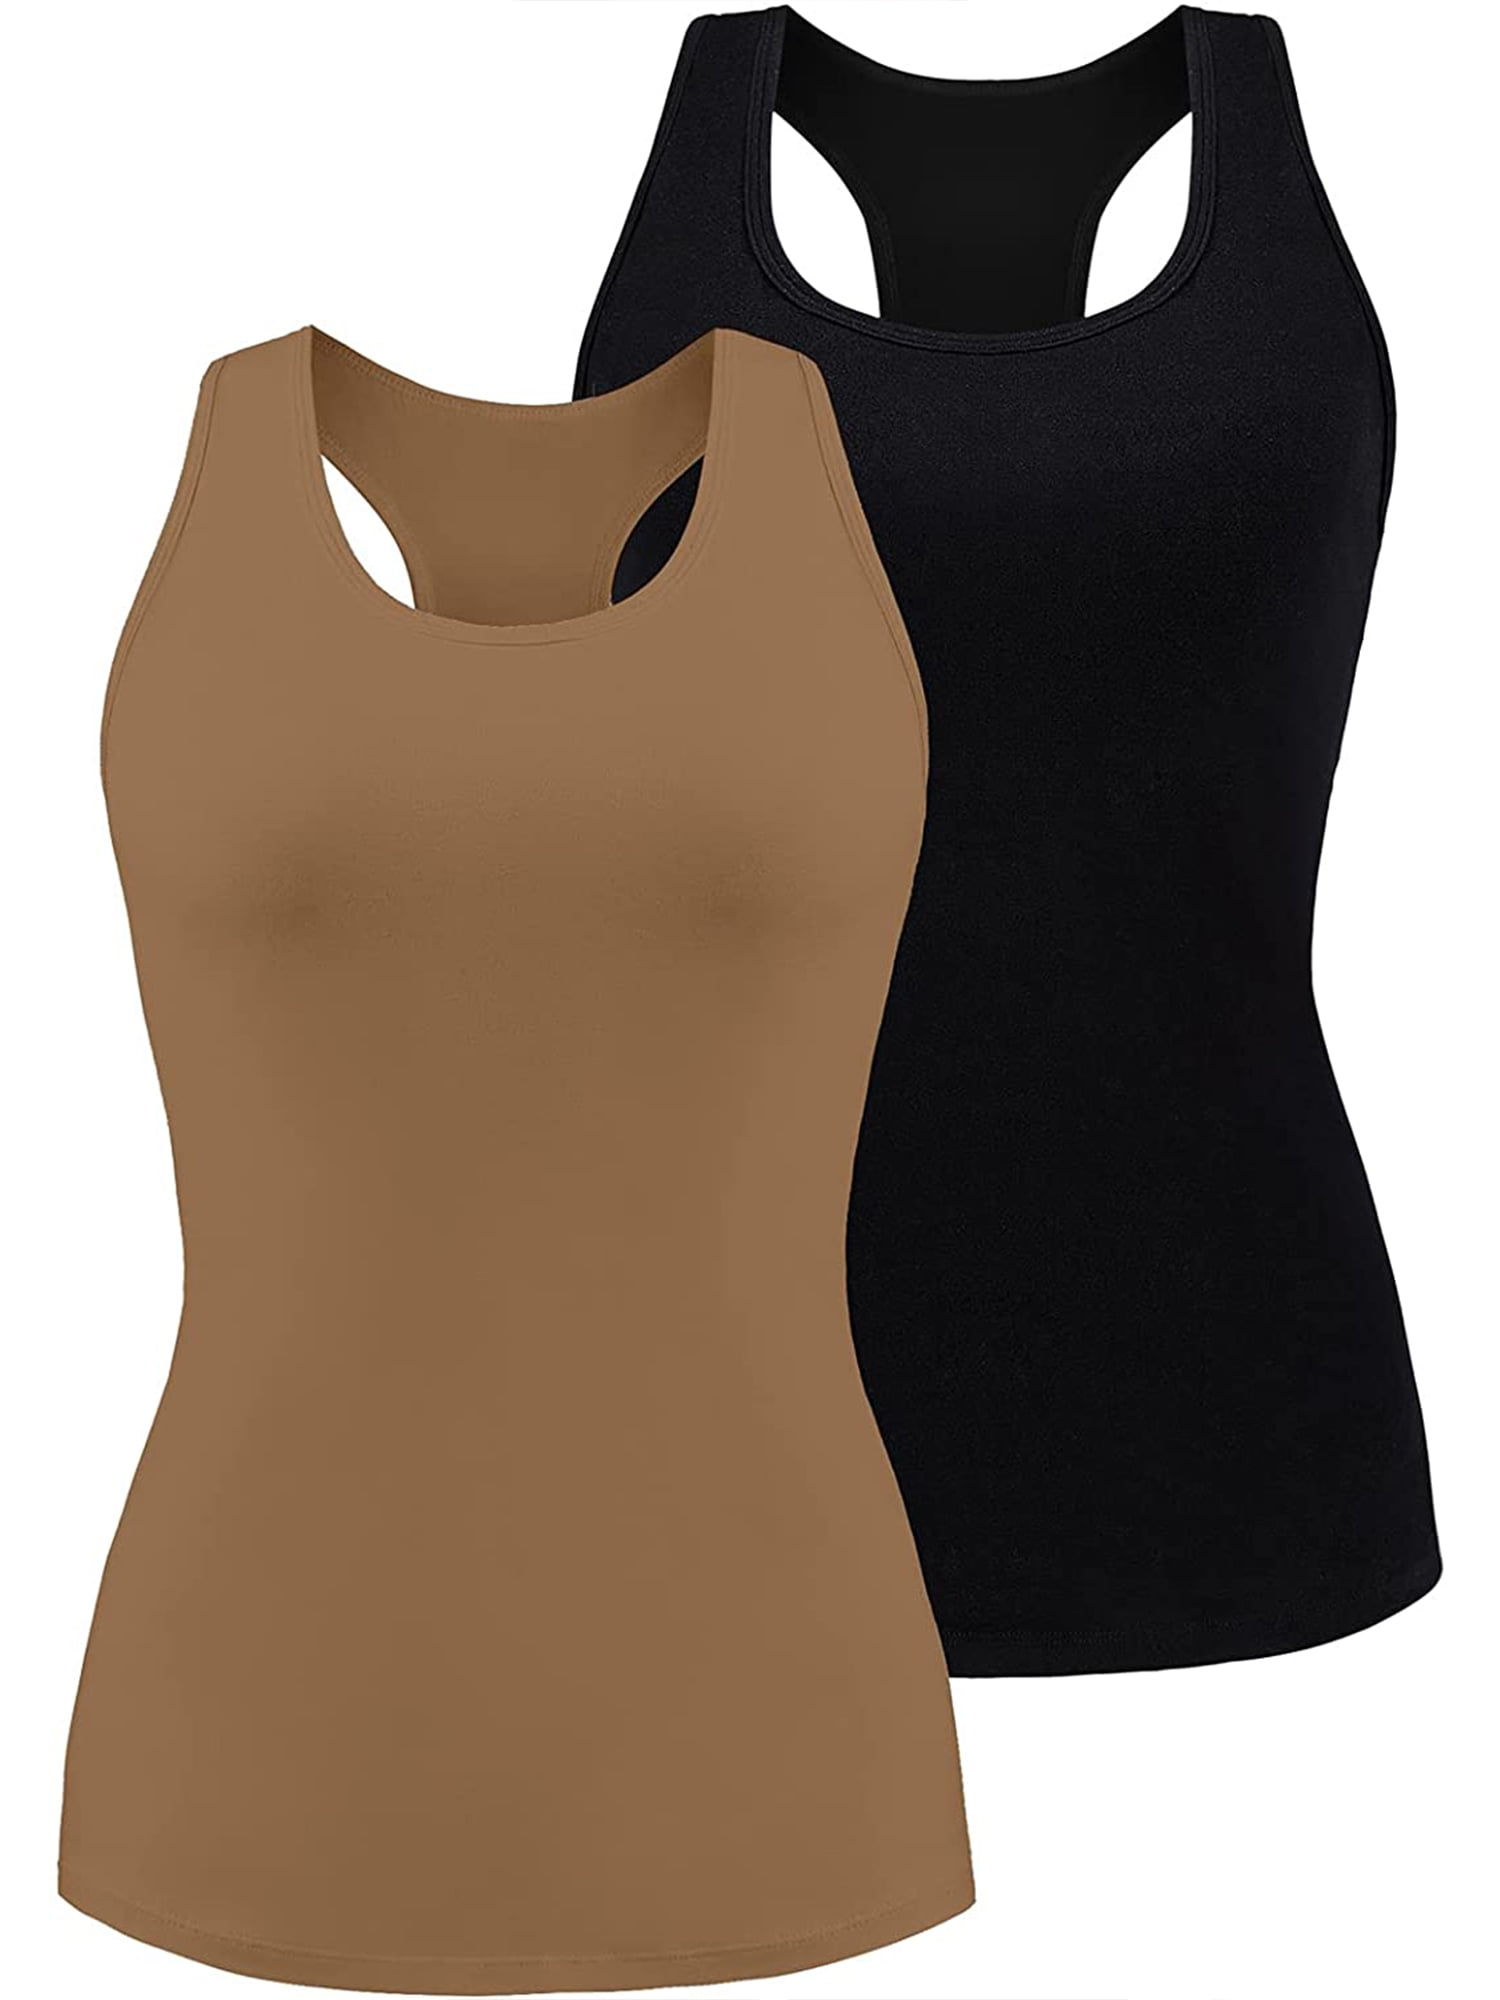 Attraco Women Tank Top with Shelf Bra Racerback Workout Yoga Tops  Undershirt Pack of 2 